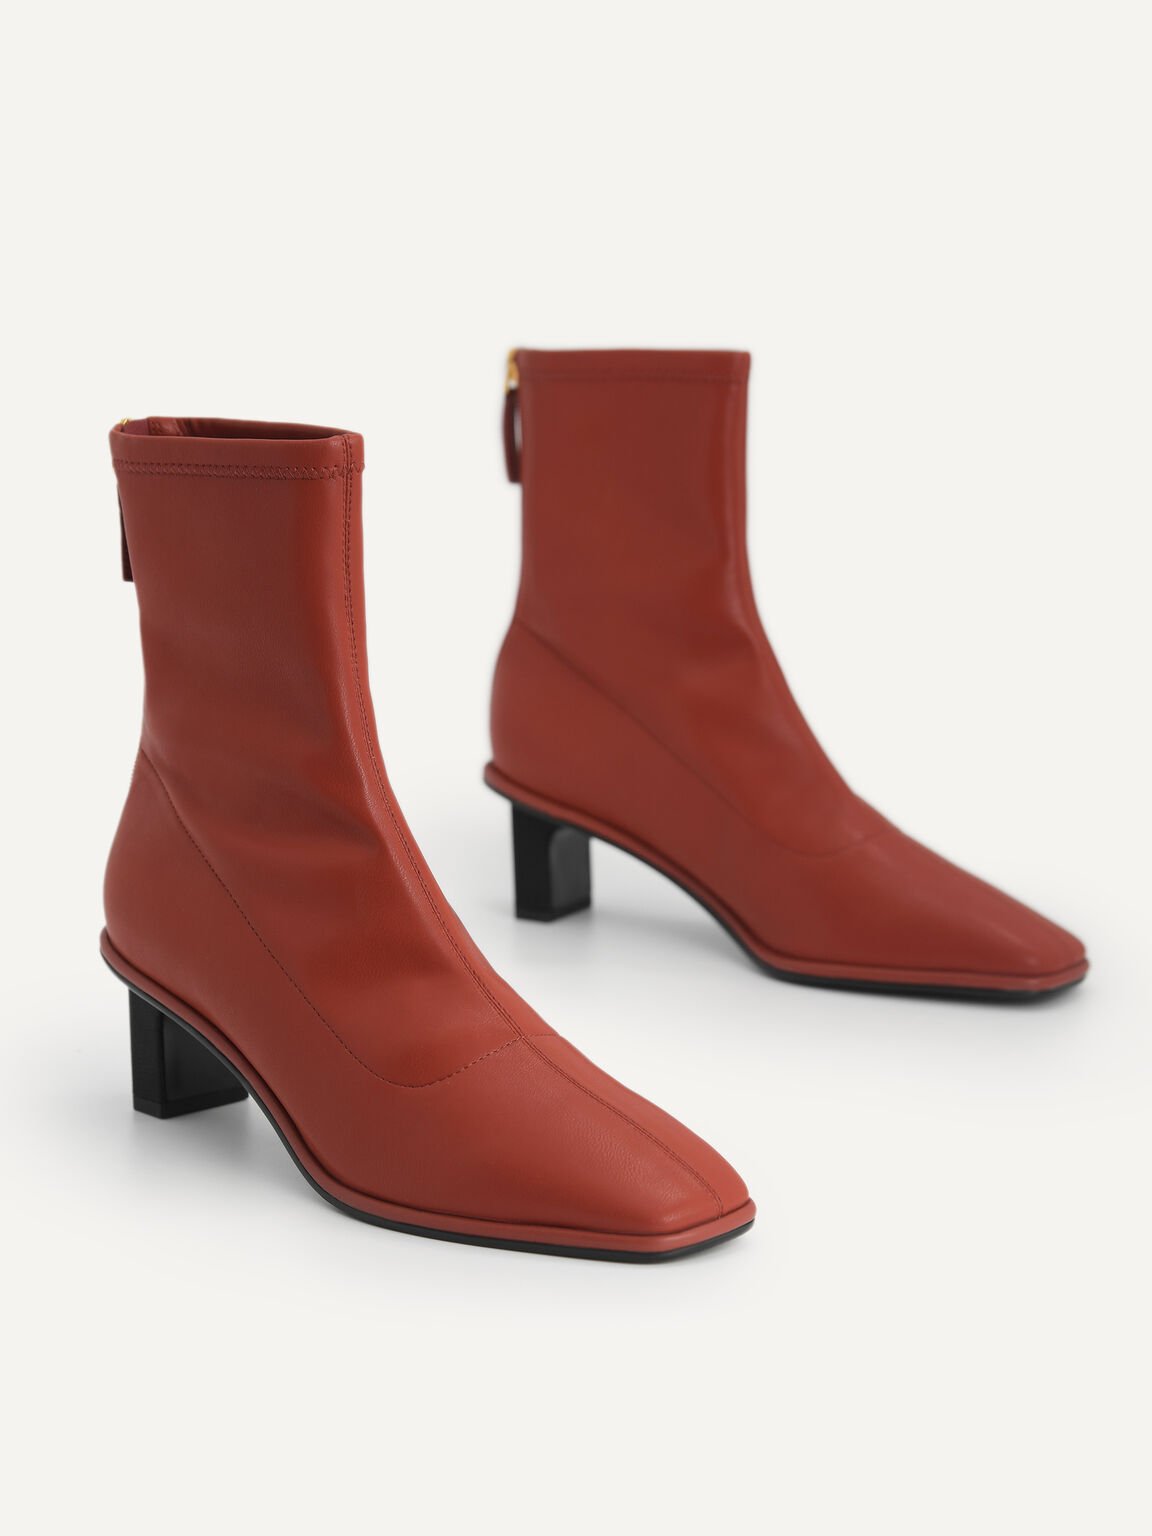 Heeled Ankle Boots, Brick